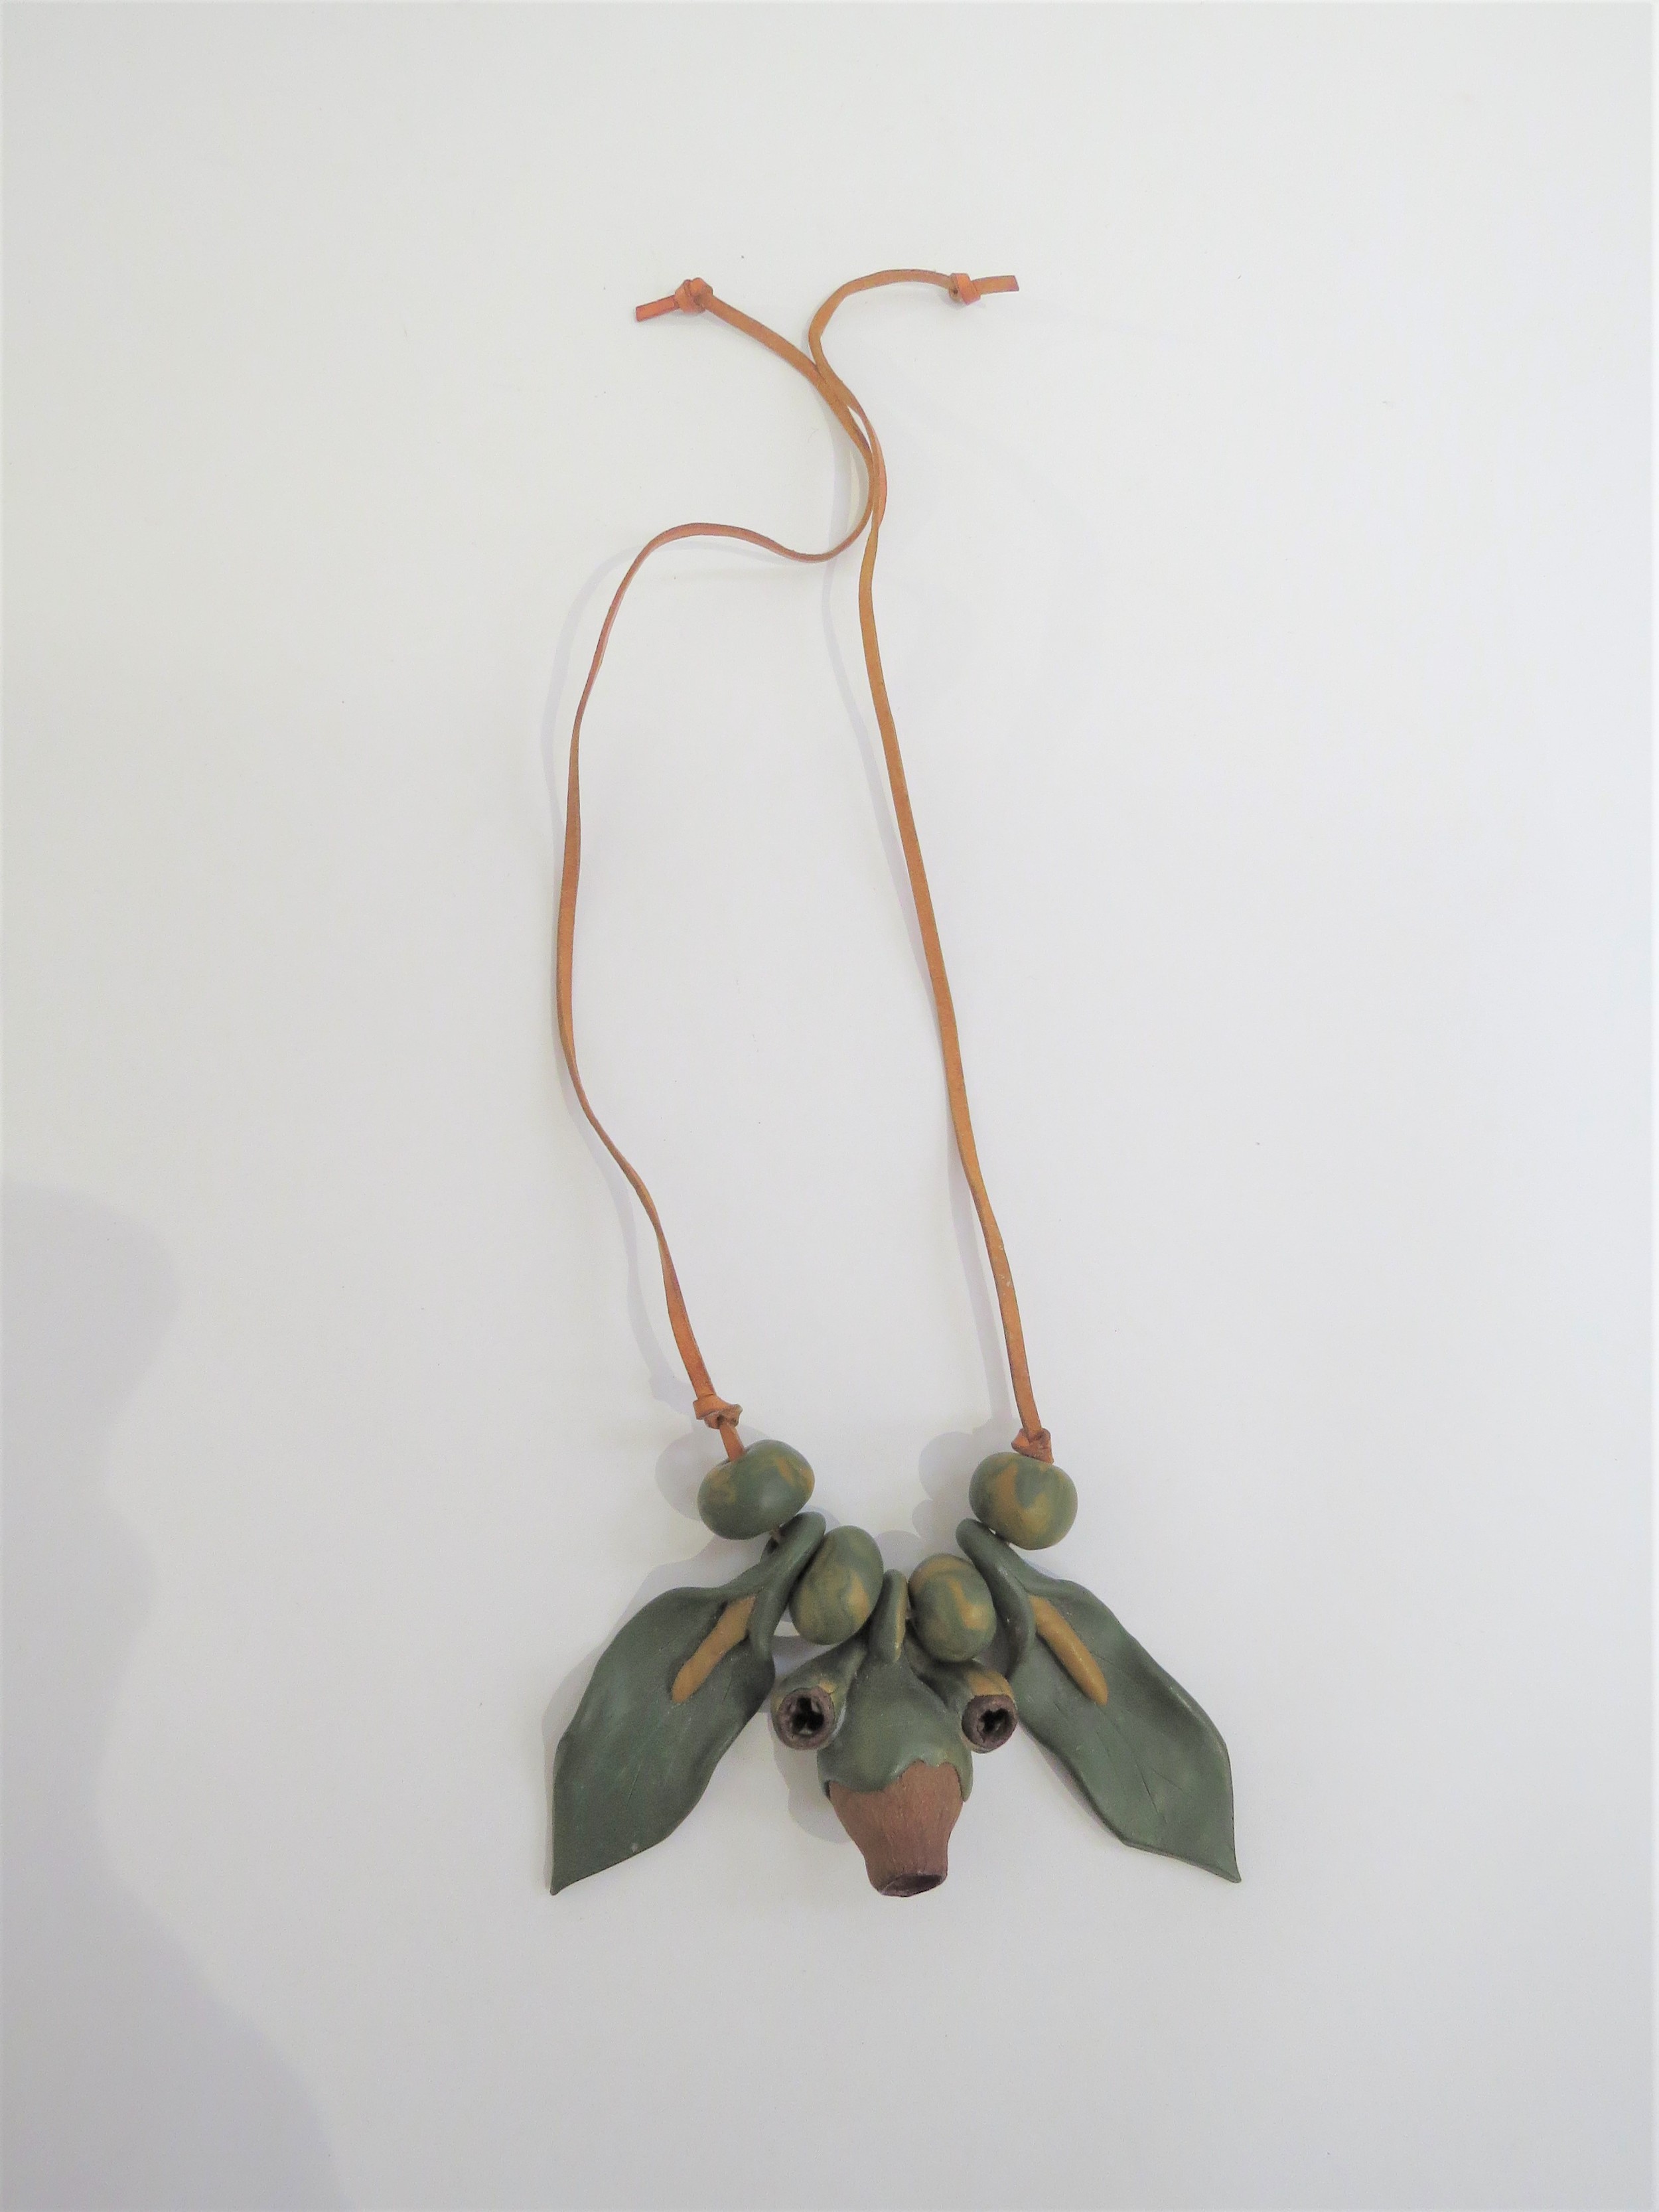 A 1970's seed pod and clay organic necklace on leather thong. - Image 2 of 2